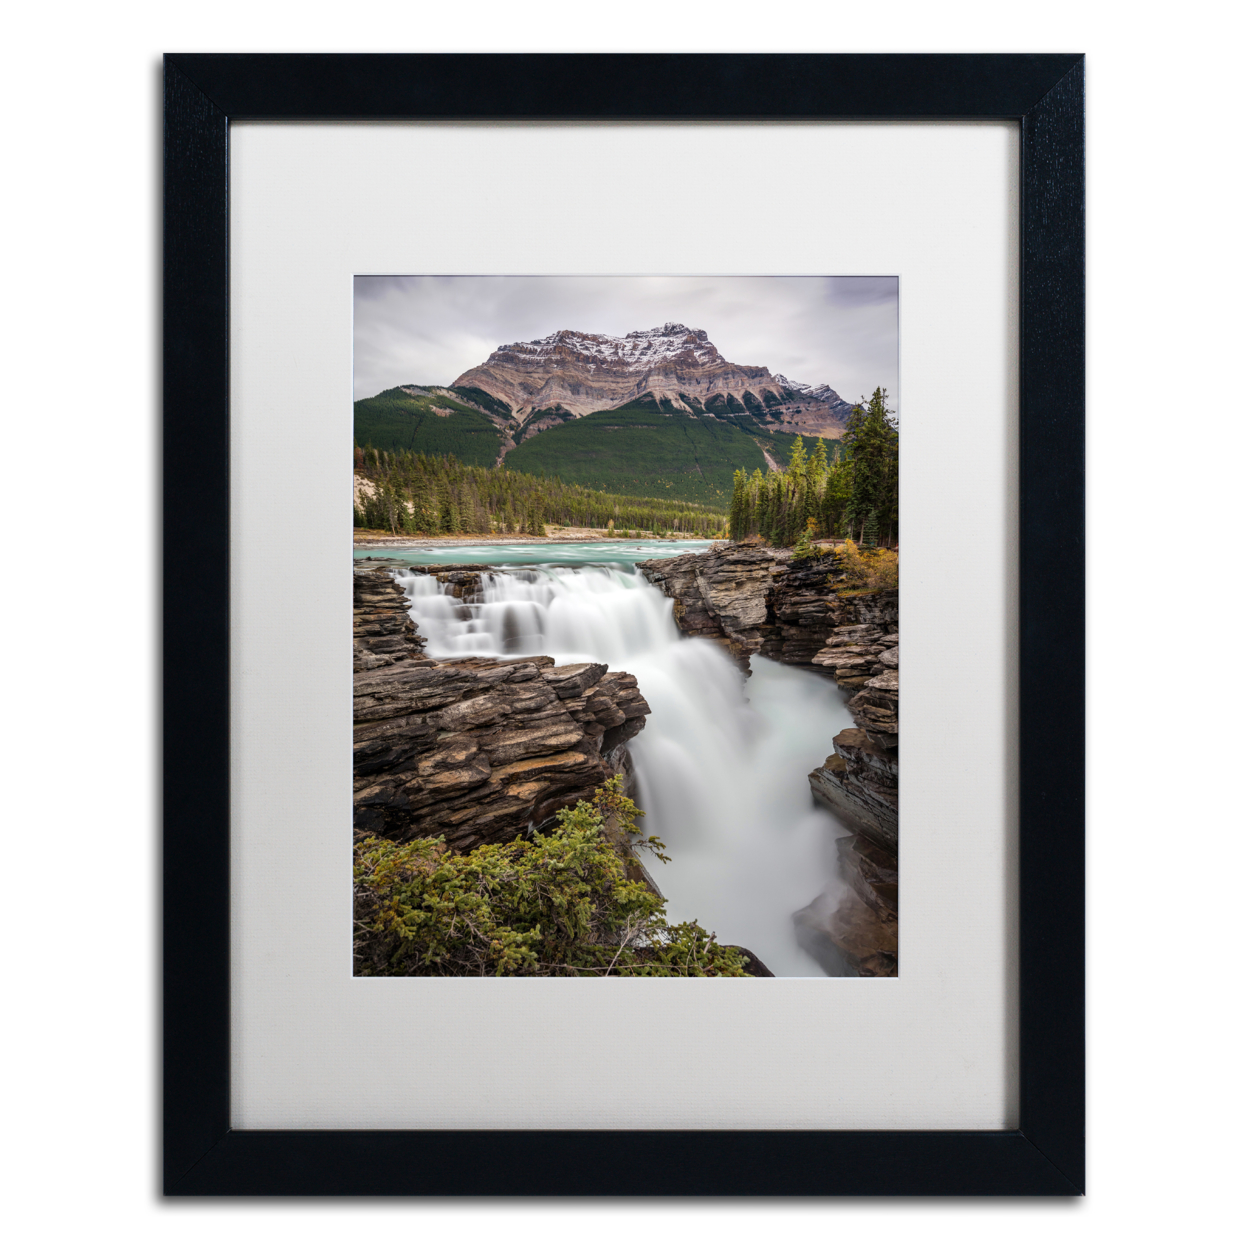 Pierre Leclerc 'Athabasca Falls' Black Wooden Framed Art 18 X 22 Inches